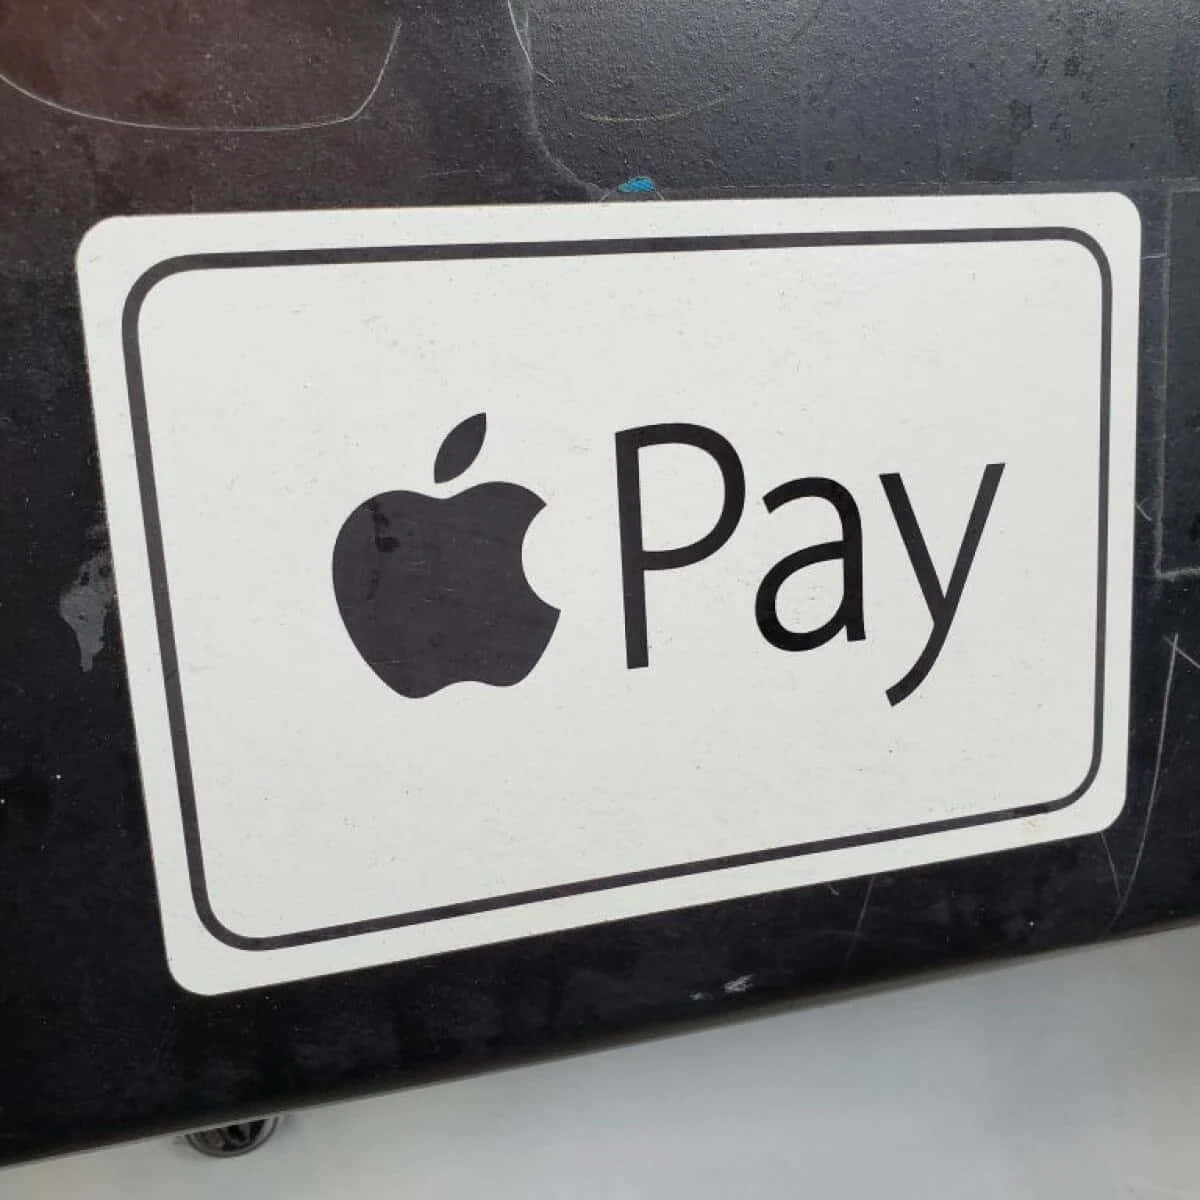 All transactions, even the smallest, have gotten a whole lot easier with Apple Pay.